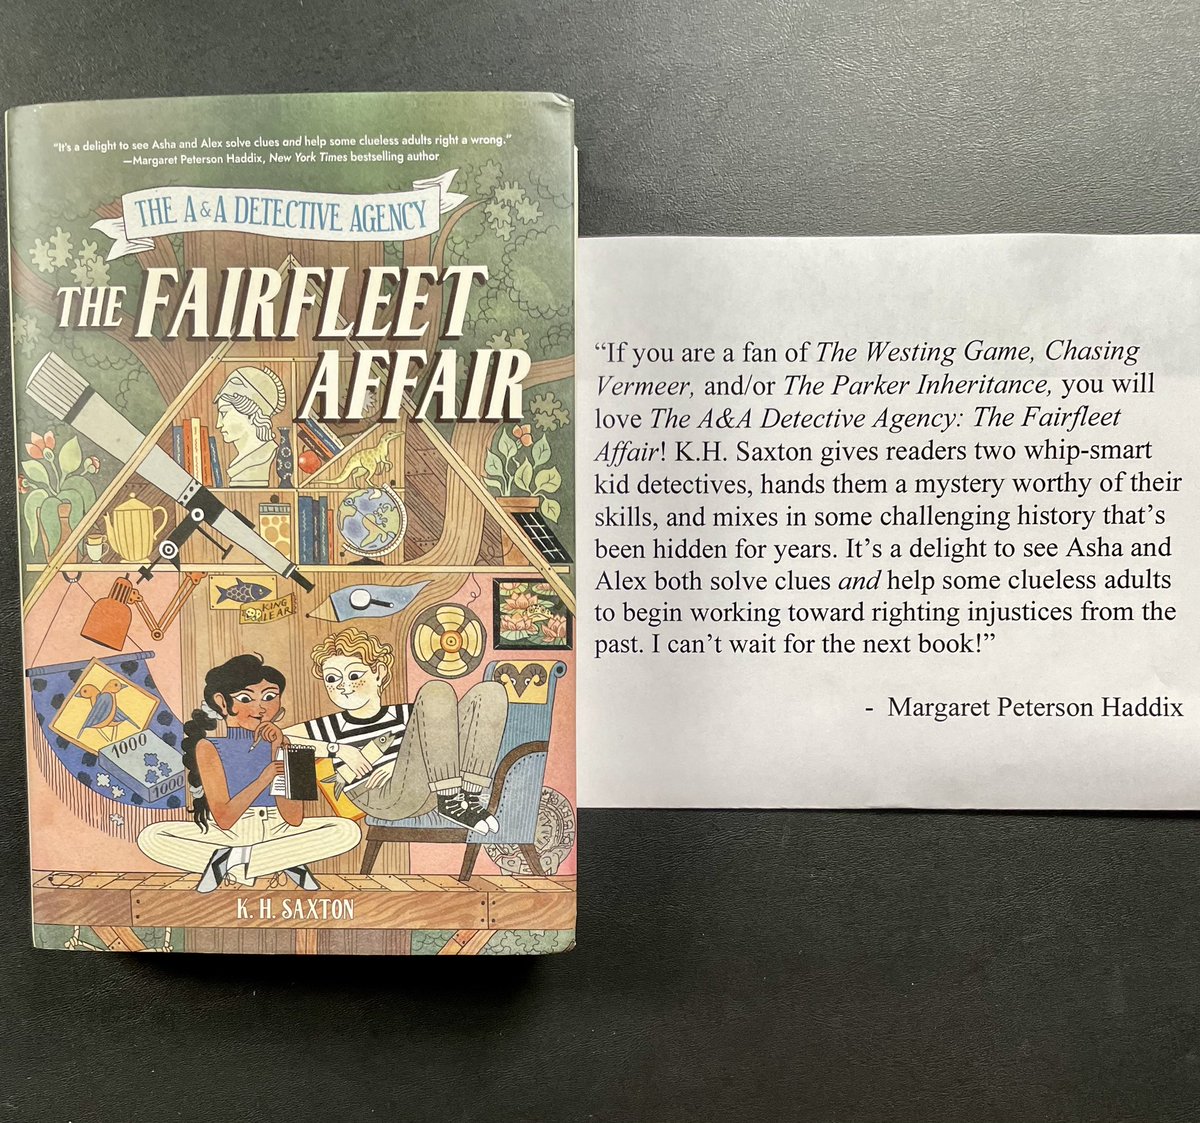 One of my favorite books of 2023 finally came out this month: THE FAIRFLEET AFFAIR by K.H. Saxton. I was lucky enough to receive an early copy, so I can tell everyone how good it is. This is one of those books I would have read again and again as a kid! @UnionSquareKids